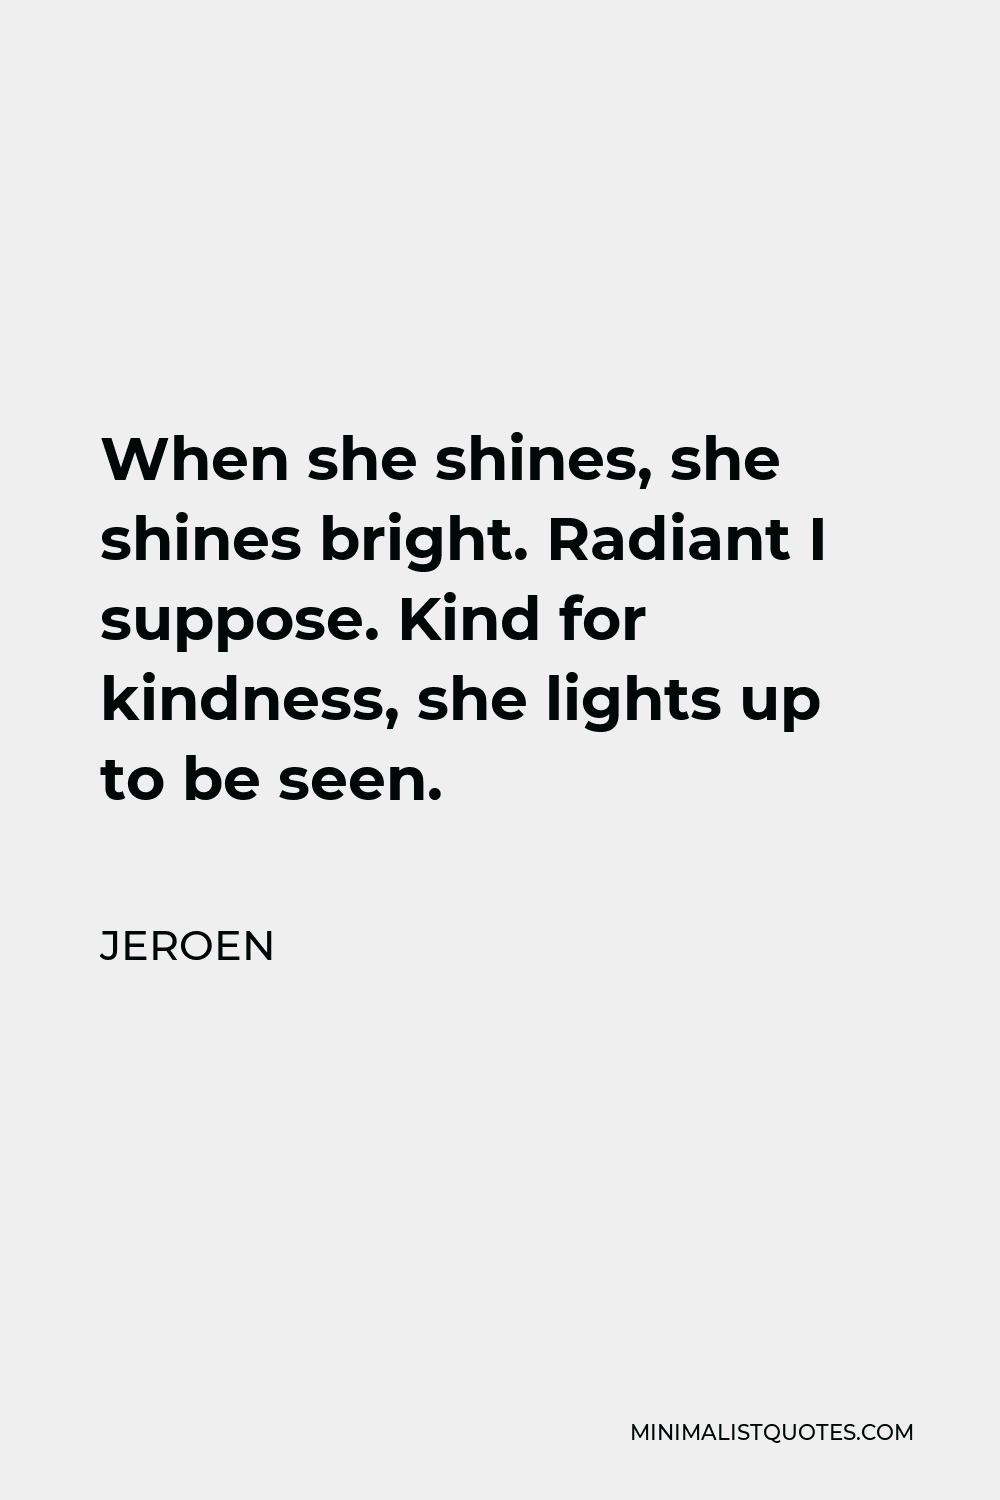 Jeroen Quote - When she shines, she shines bright. Radiant I suppose. Kind for kindness, she lights up to be seen.